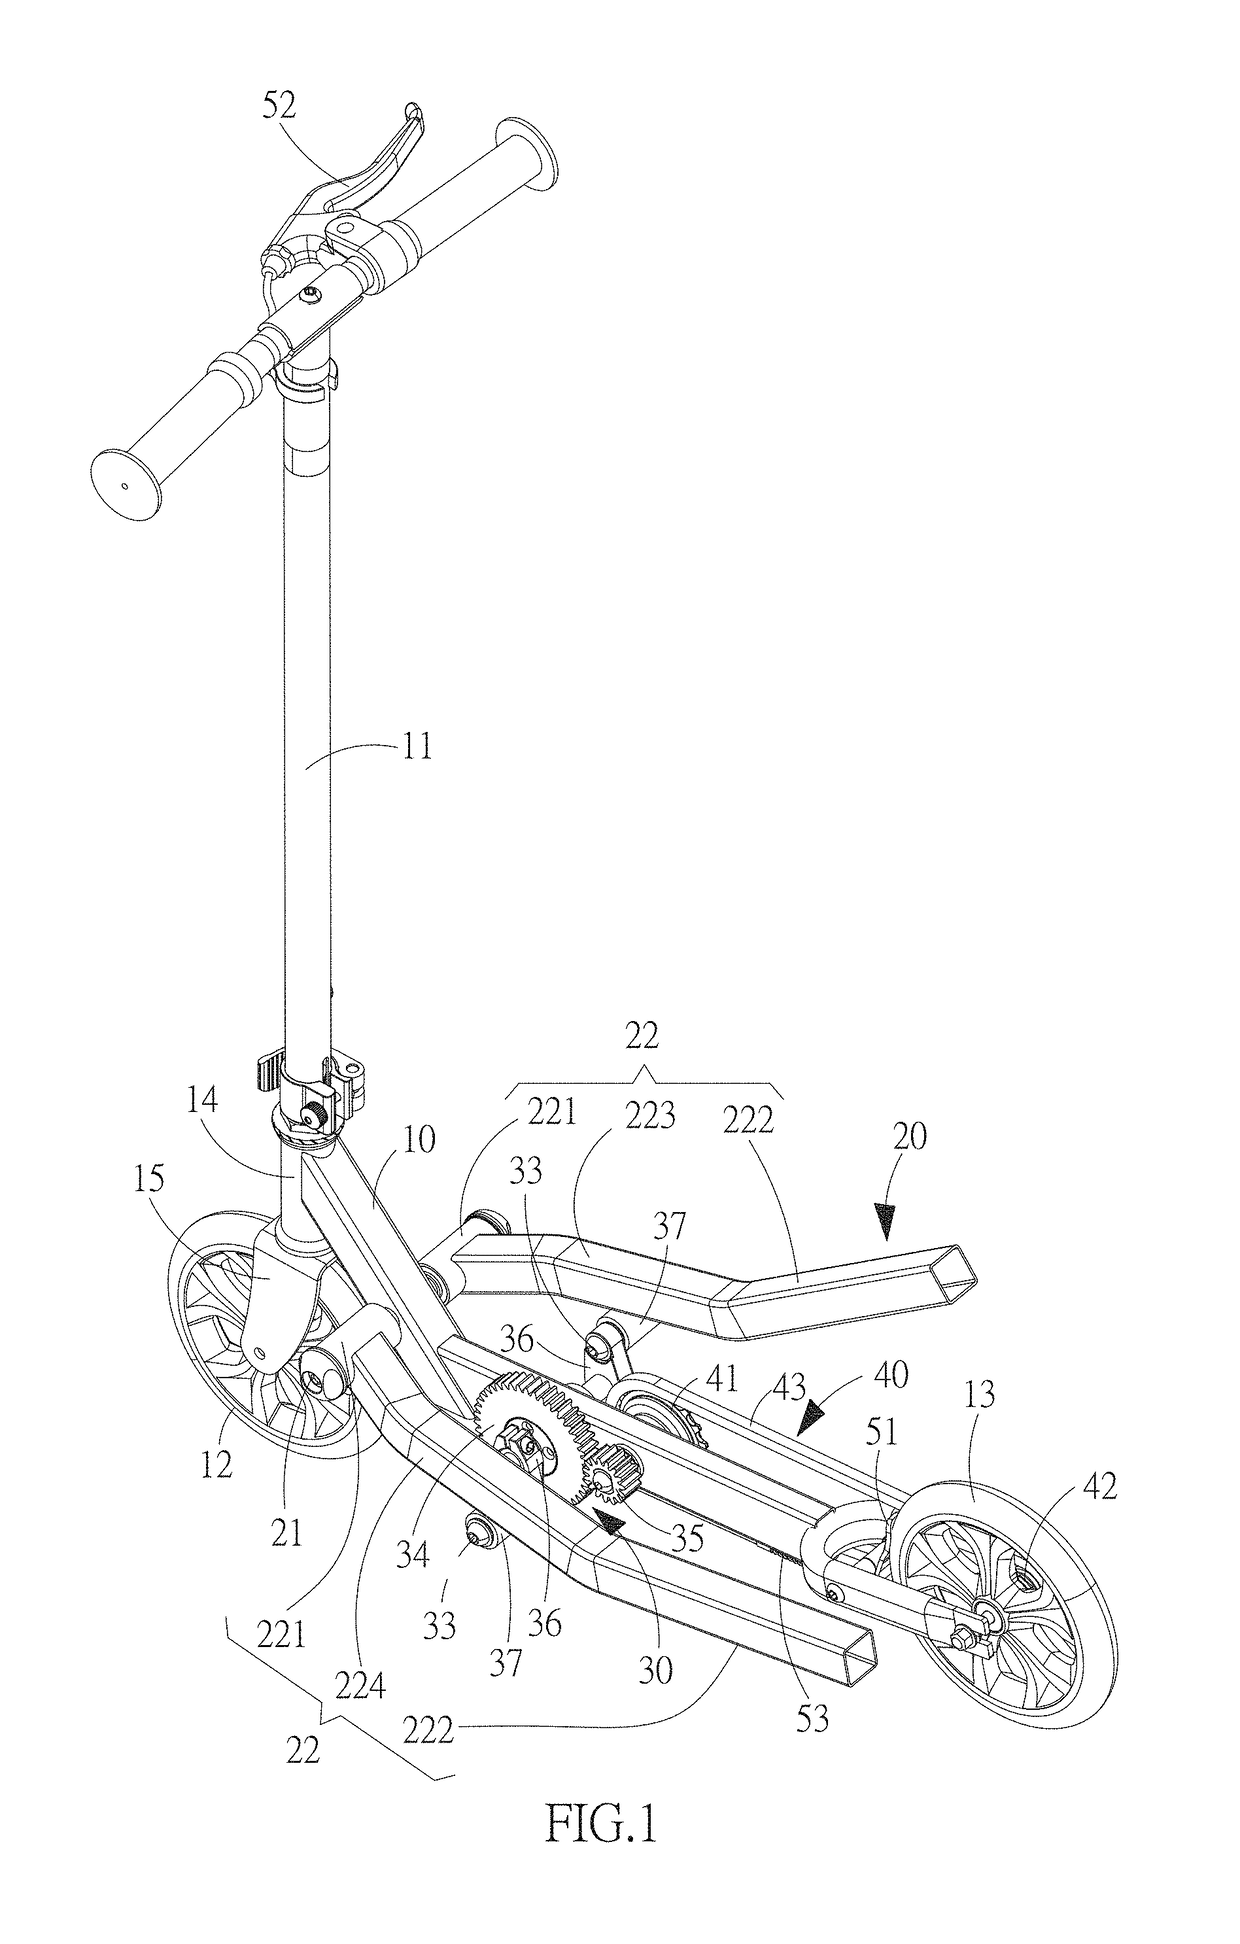 Direct-drive double wing scooter